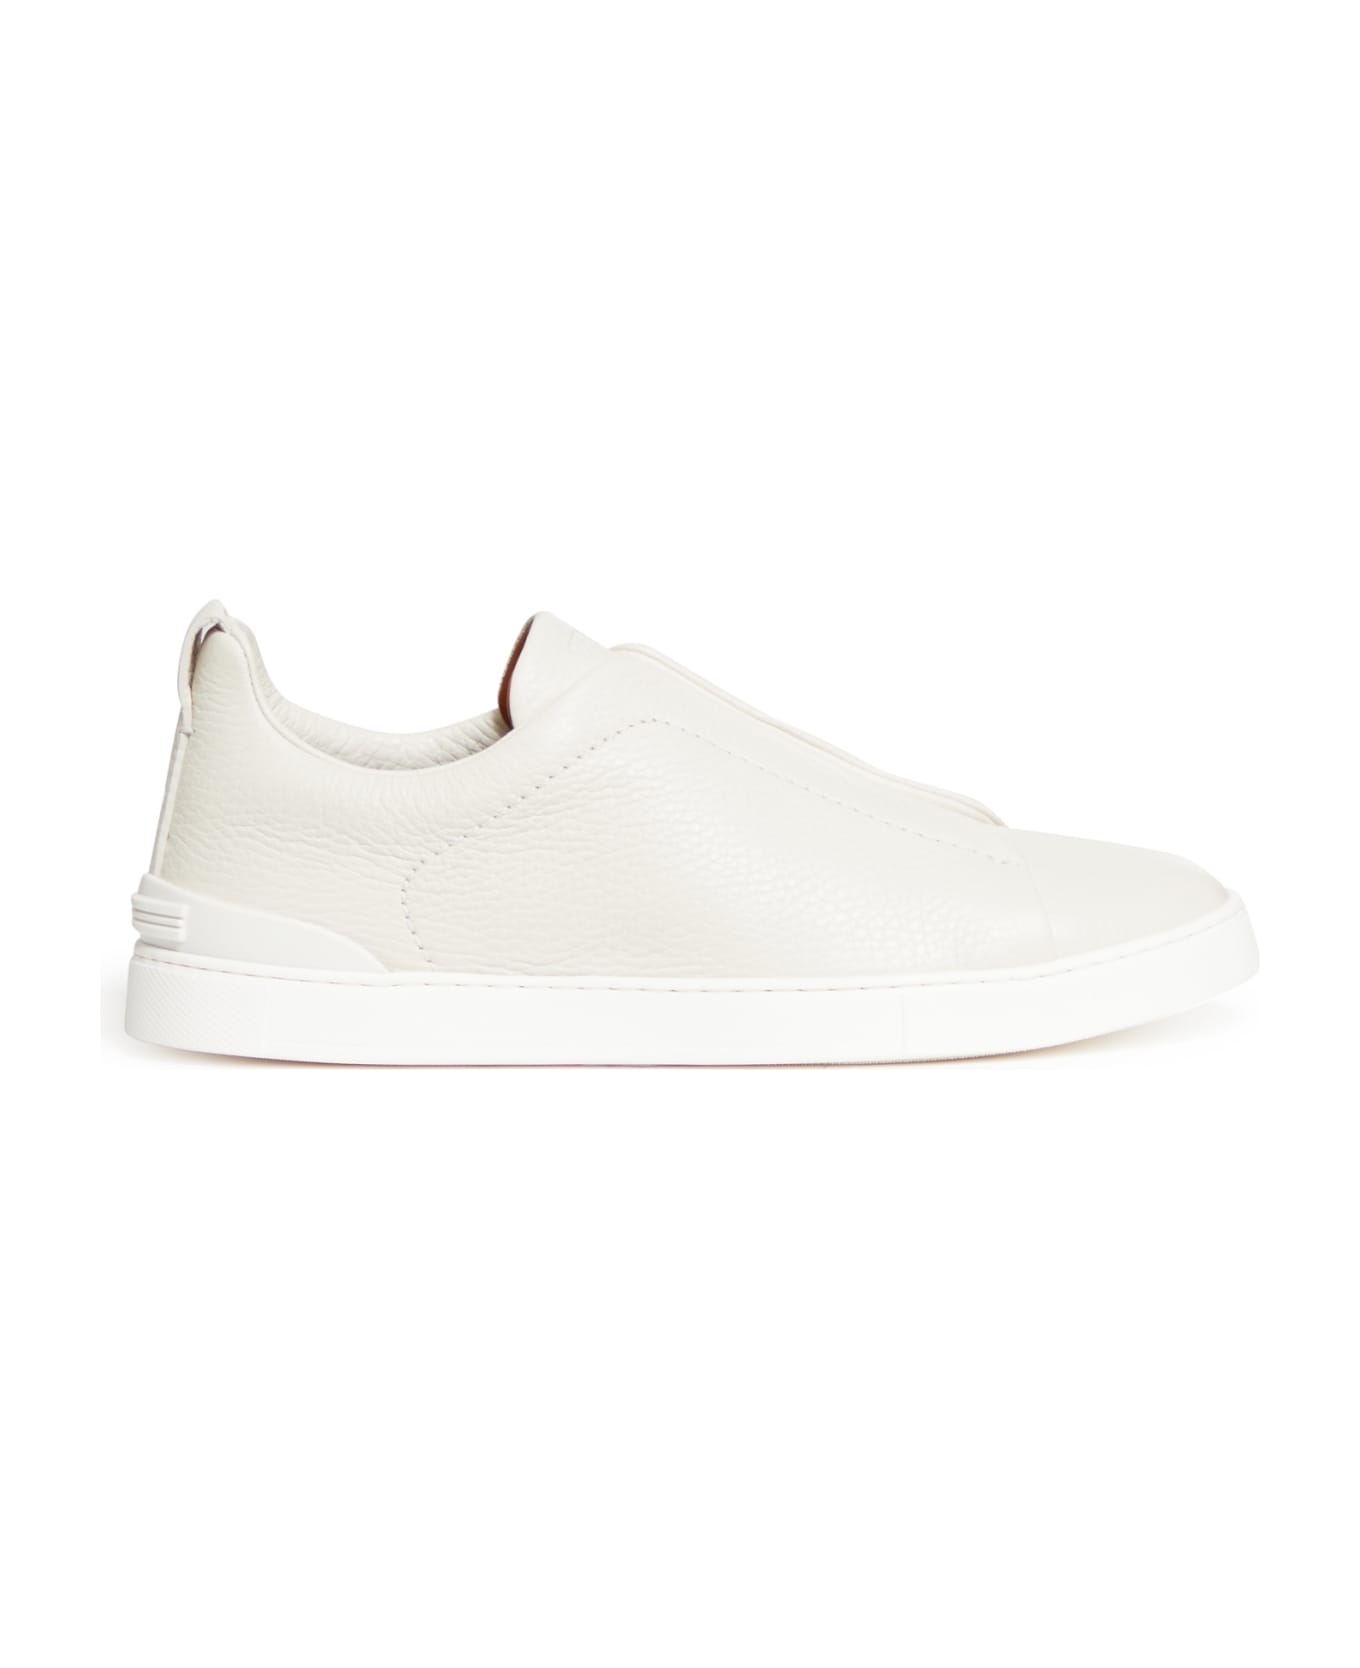 Zegna Snk-sneakers - Pan White スニーカー